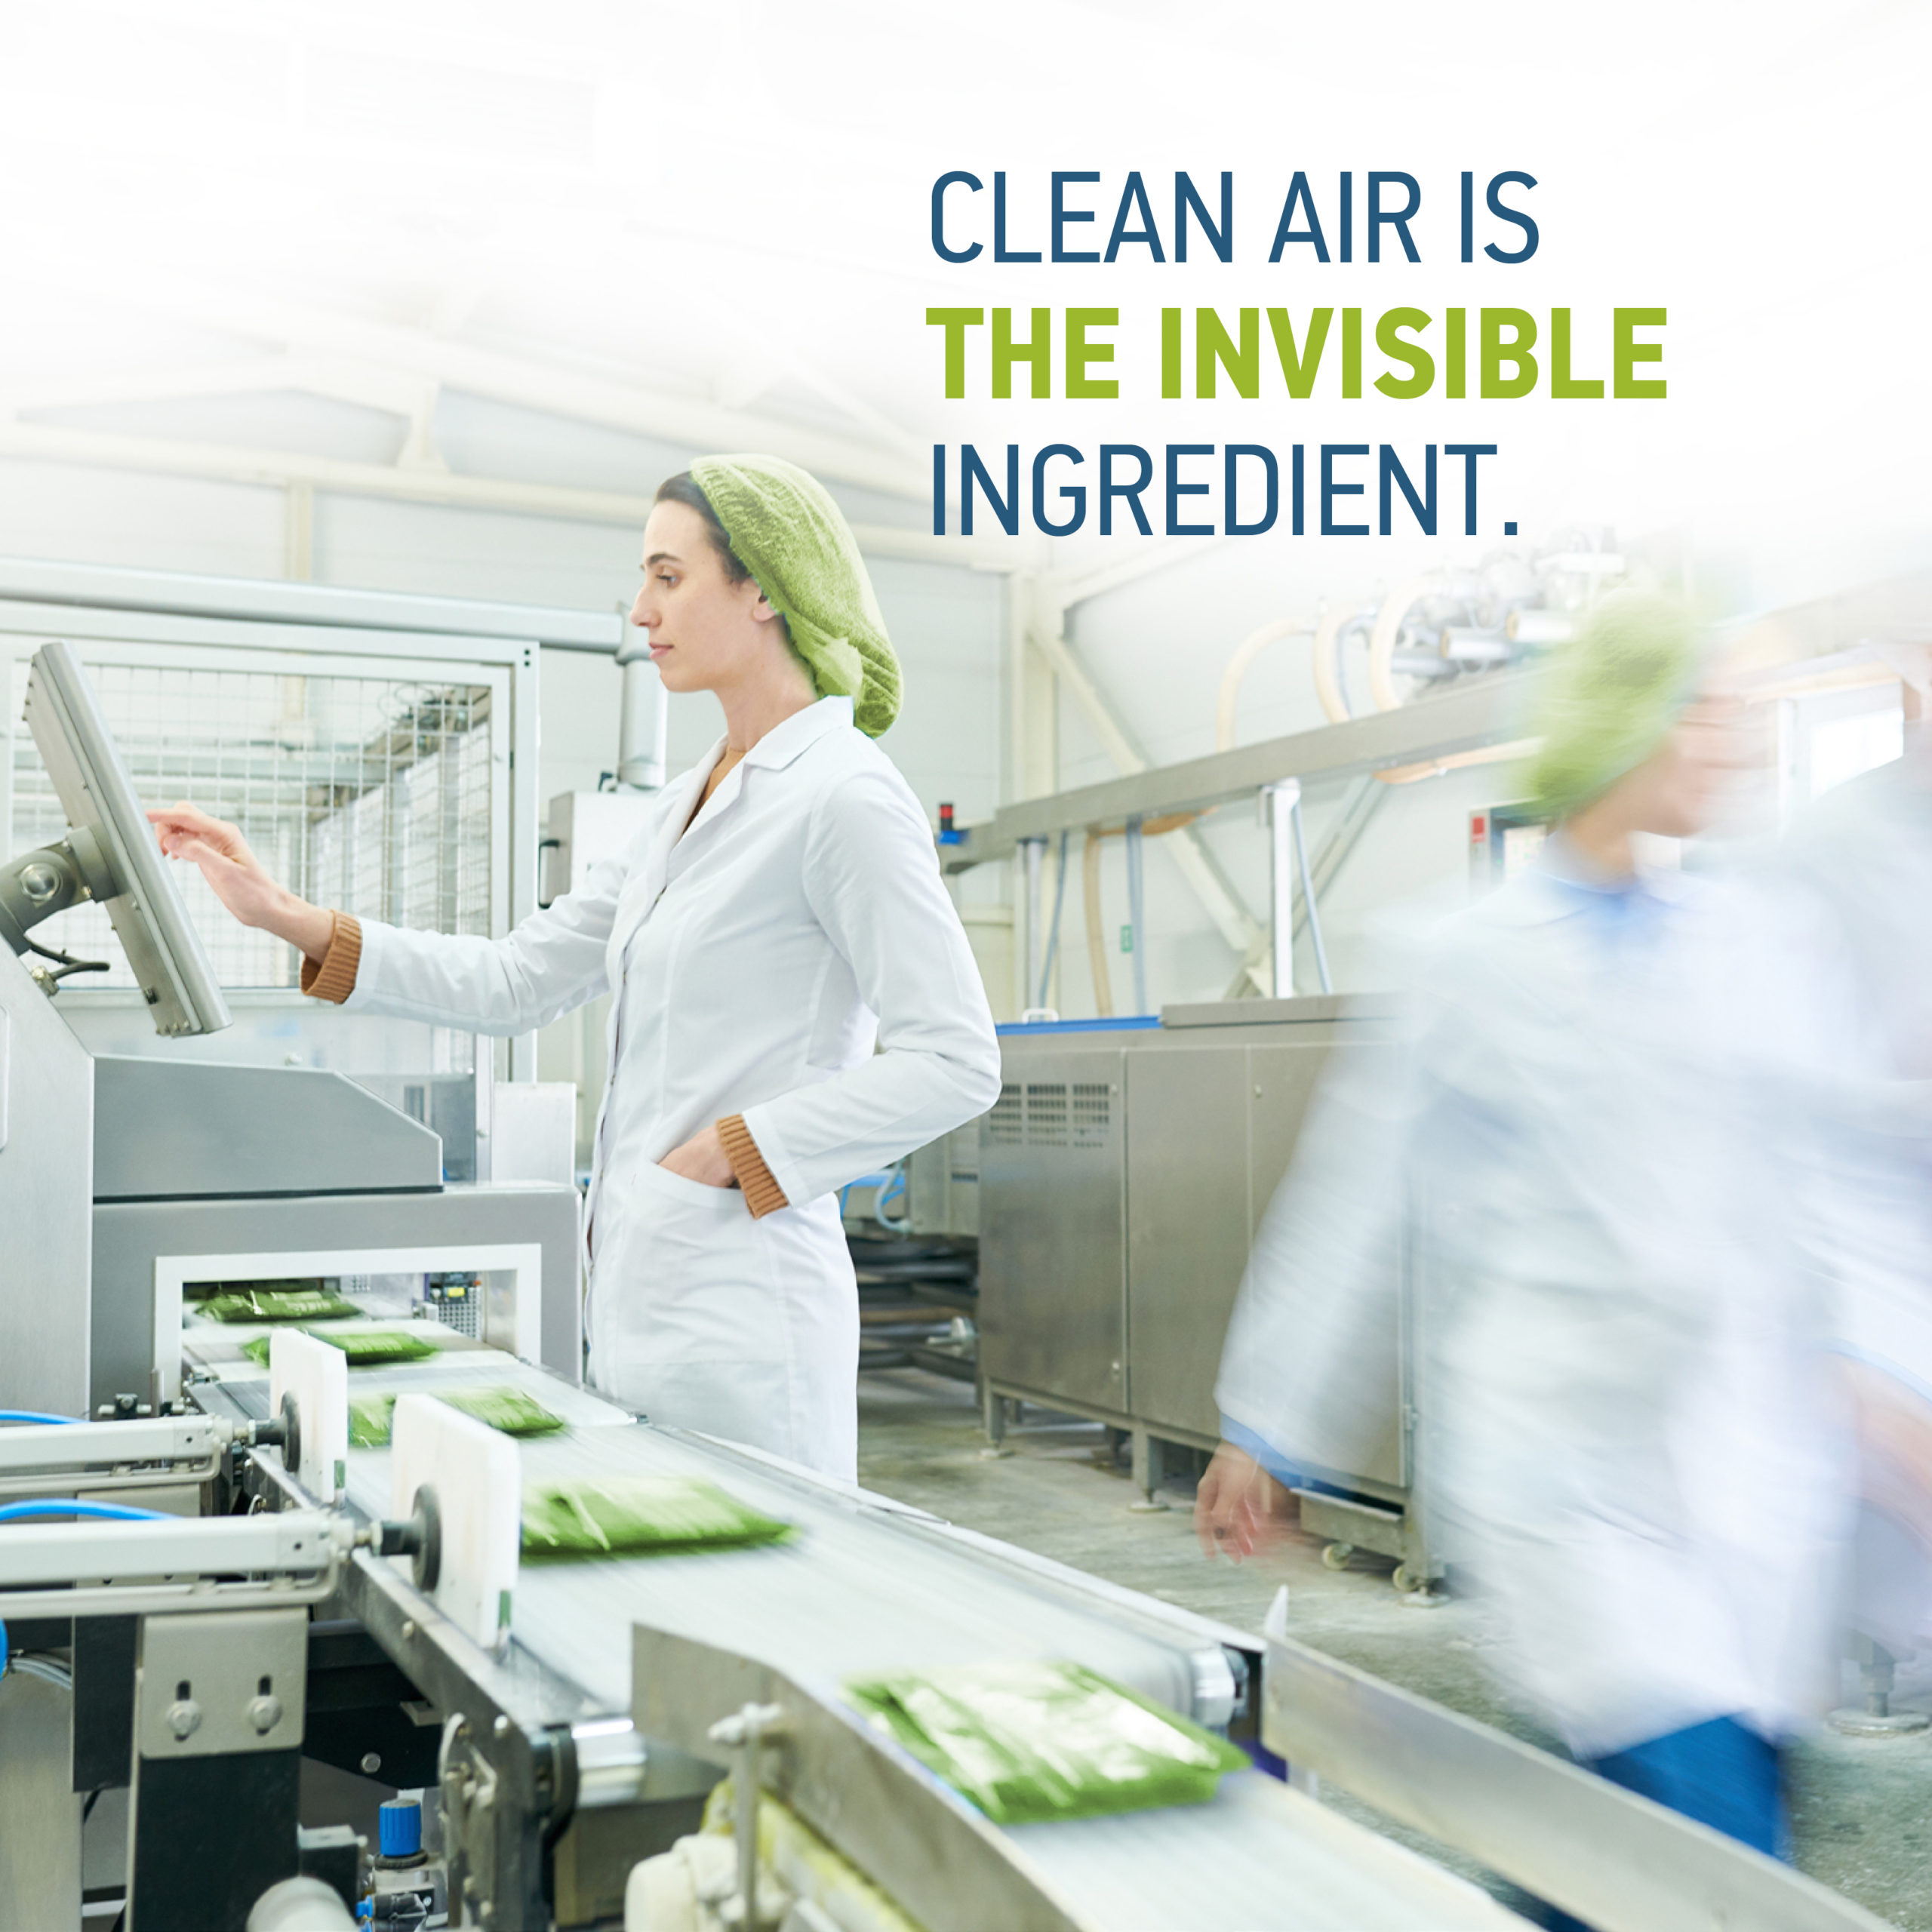 Clean air is the invisible ingredient